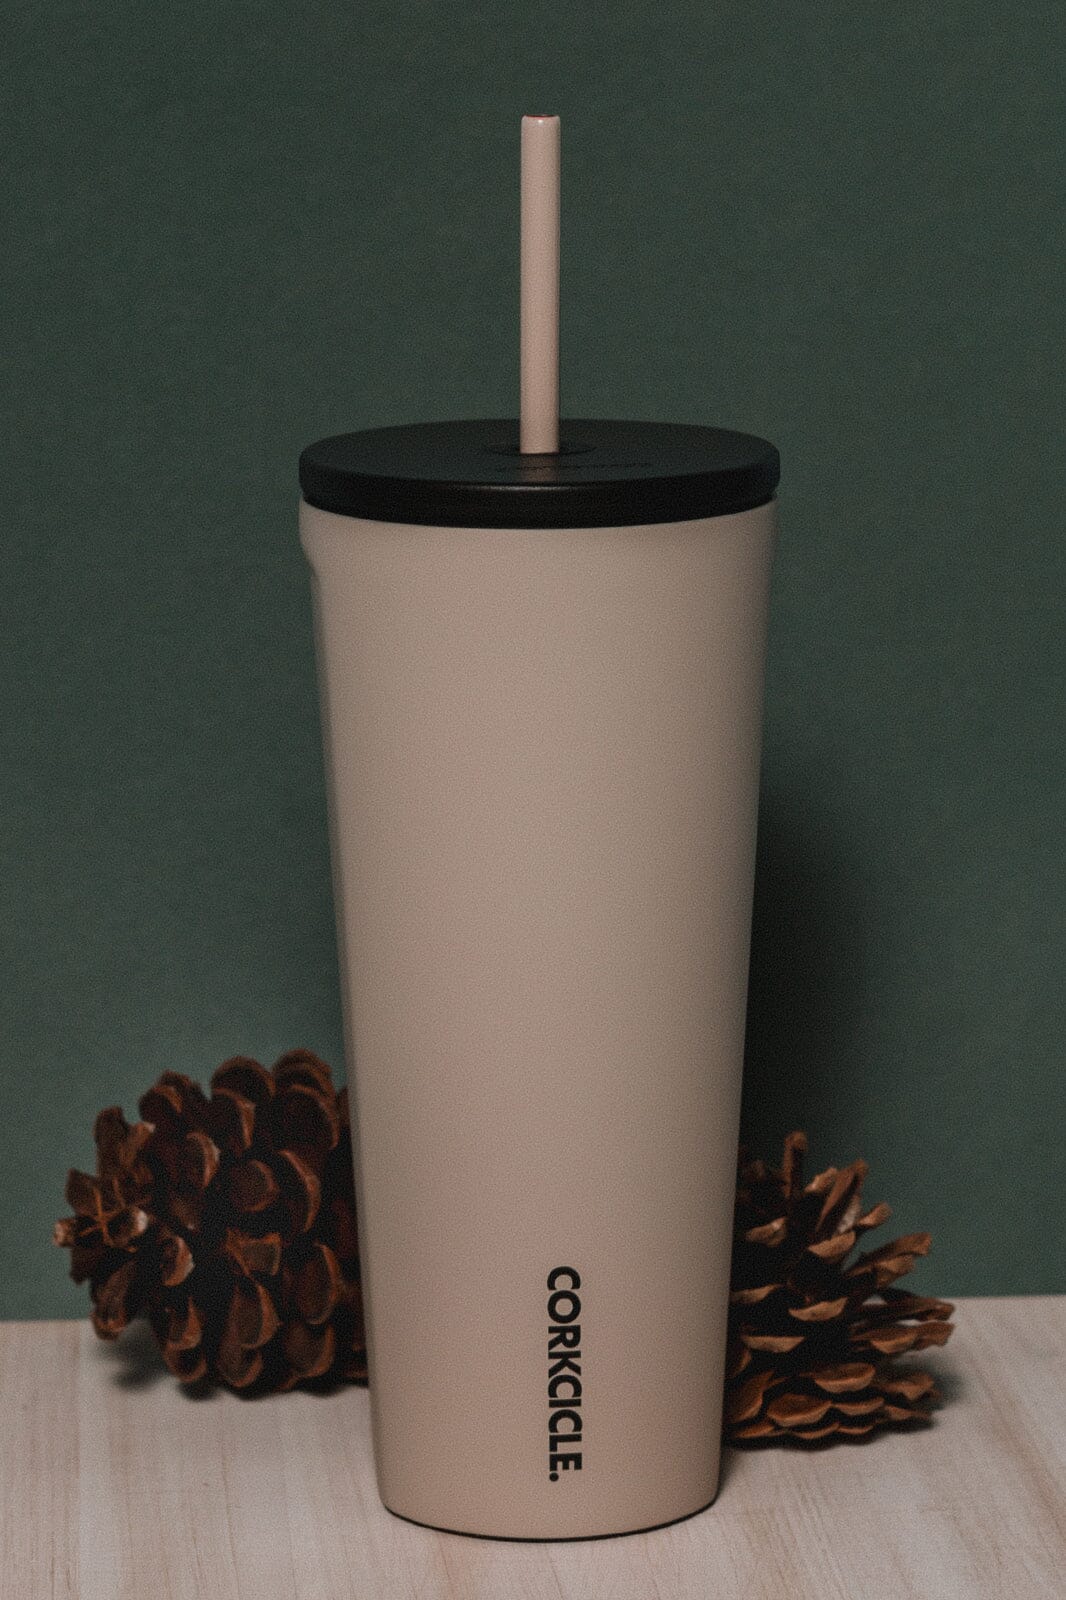 US Open Corkcicle Cold Cup with Straw - White